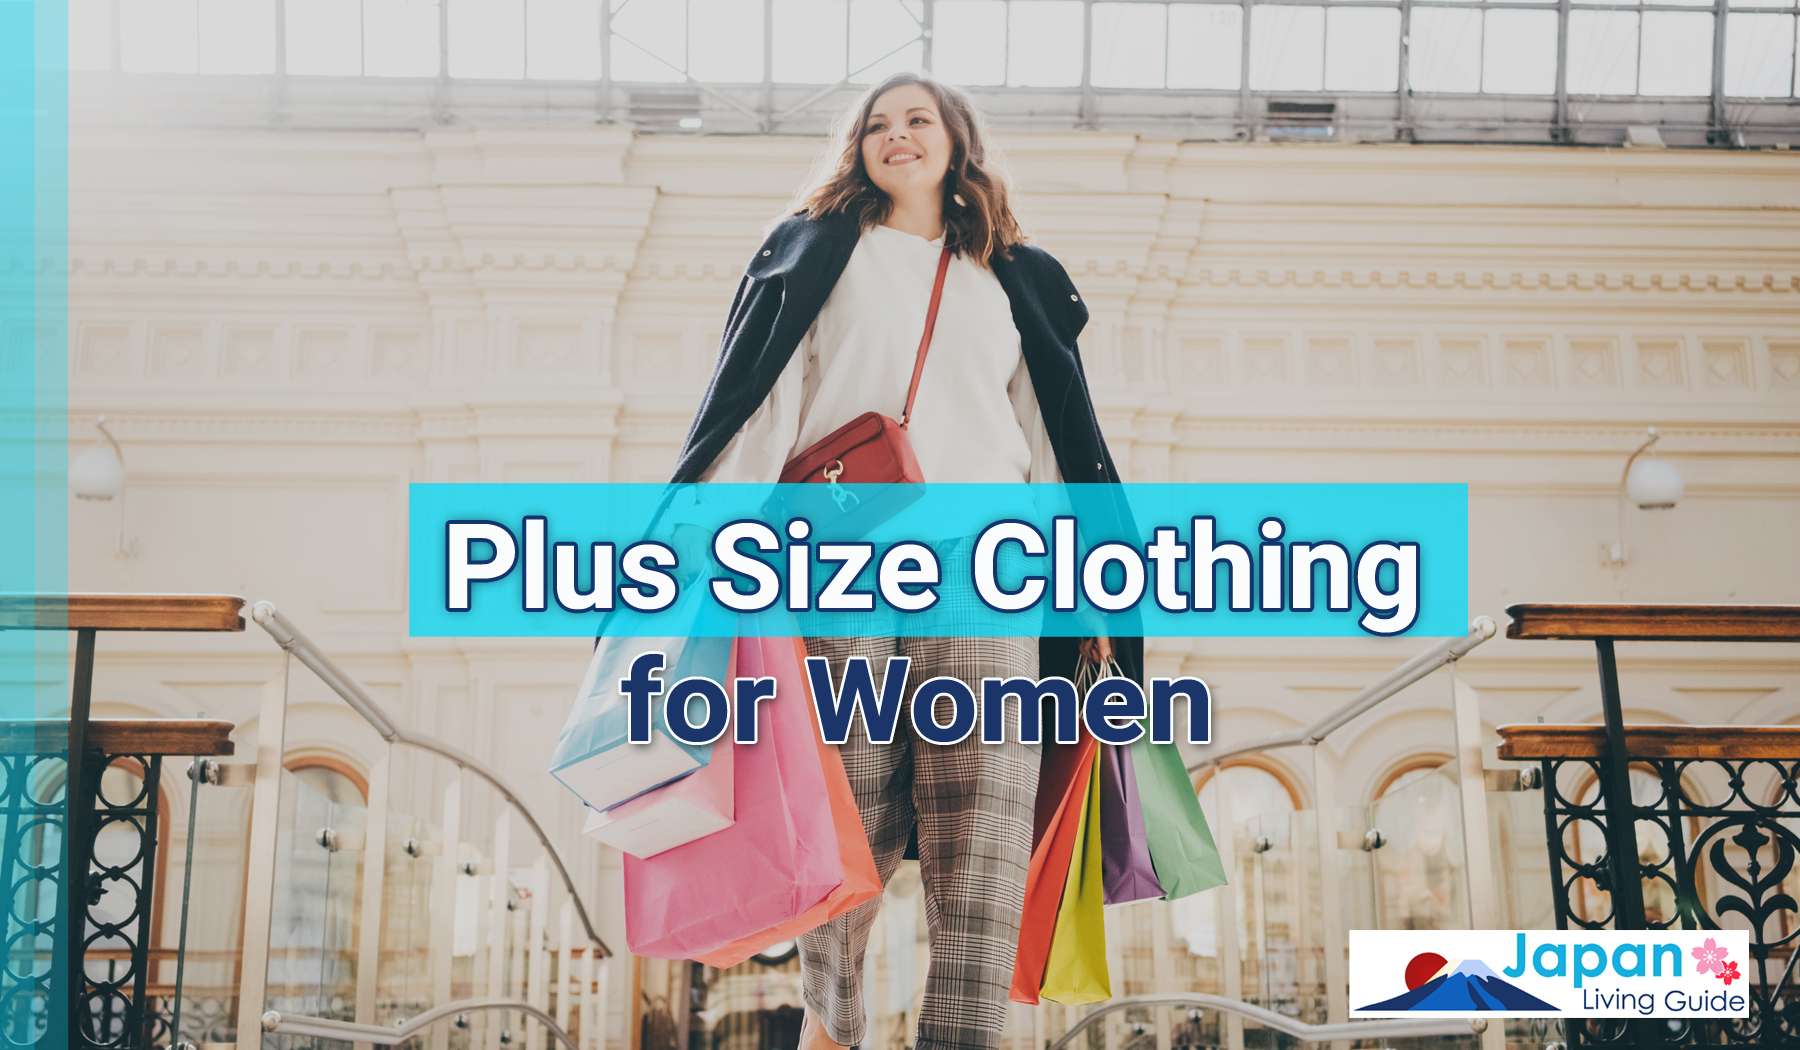 Where to Buy Plus Size Women's Clothes in Japan - JapanLivingGuide